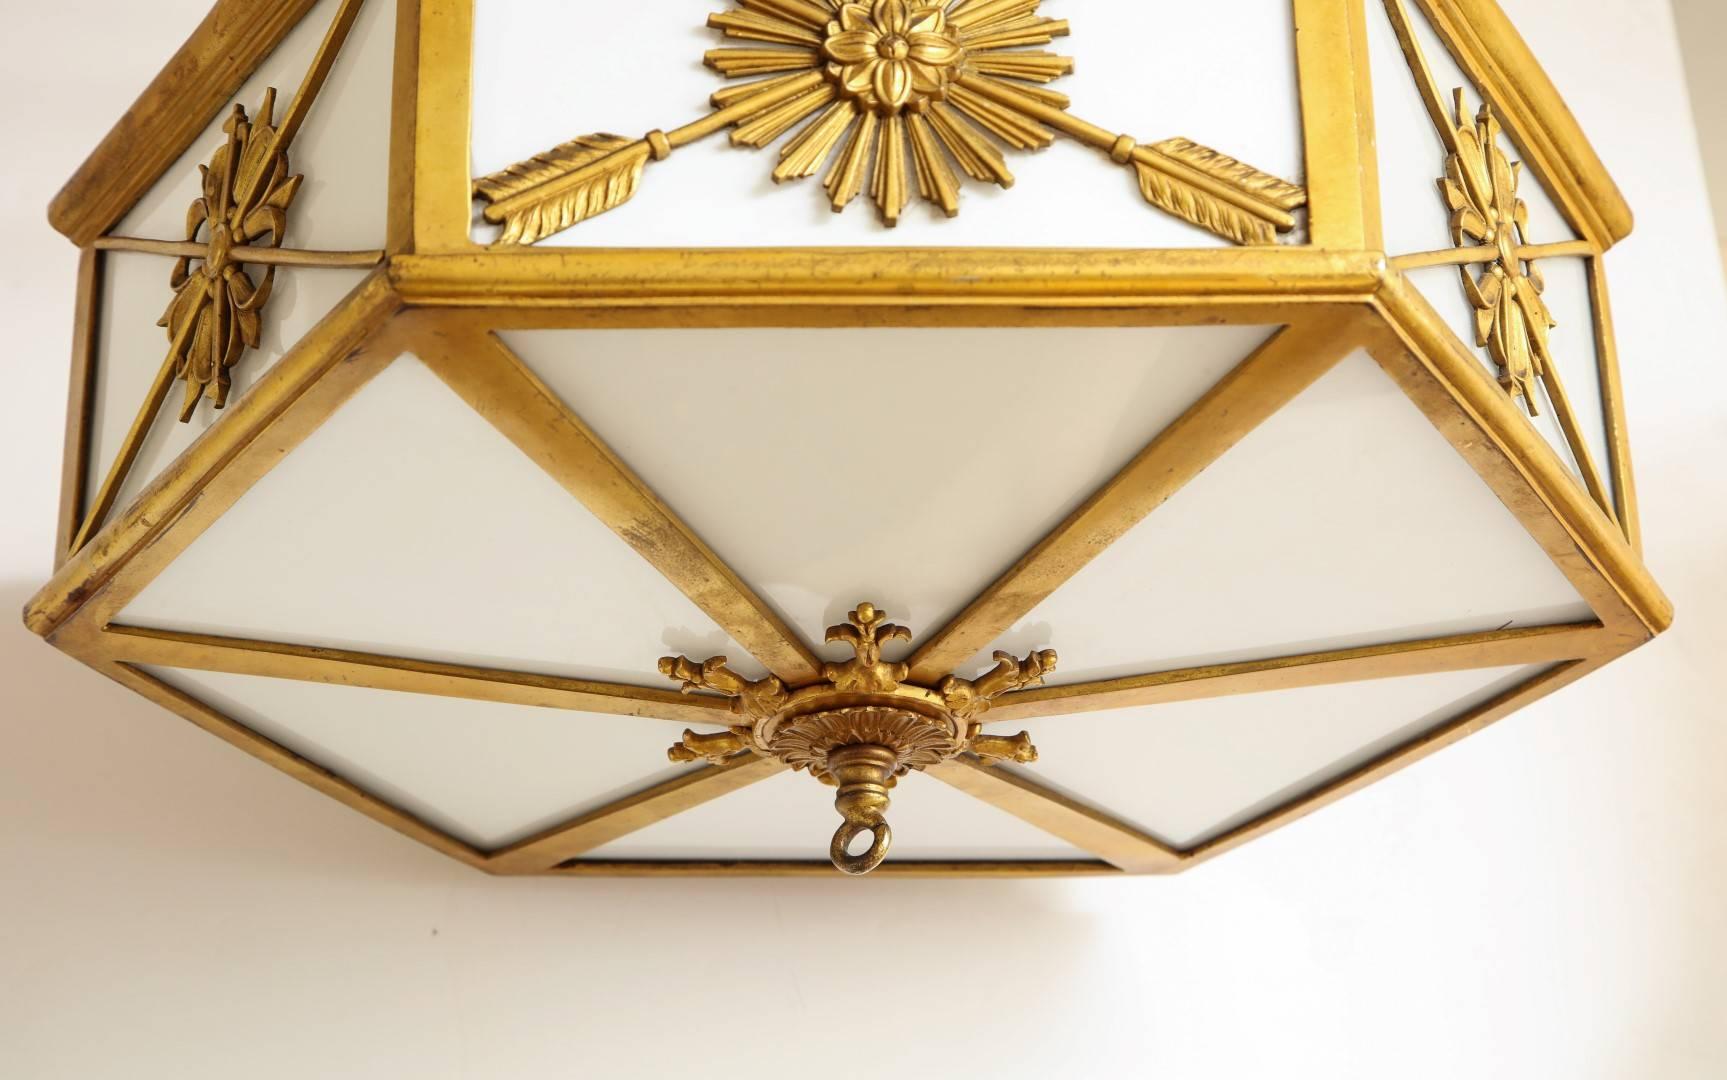 Hexagonal Ceiling Fixture Attributed to E.F. Caldwell 1